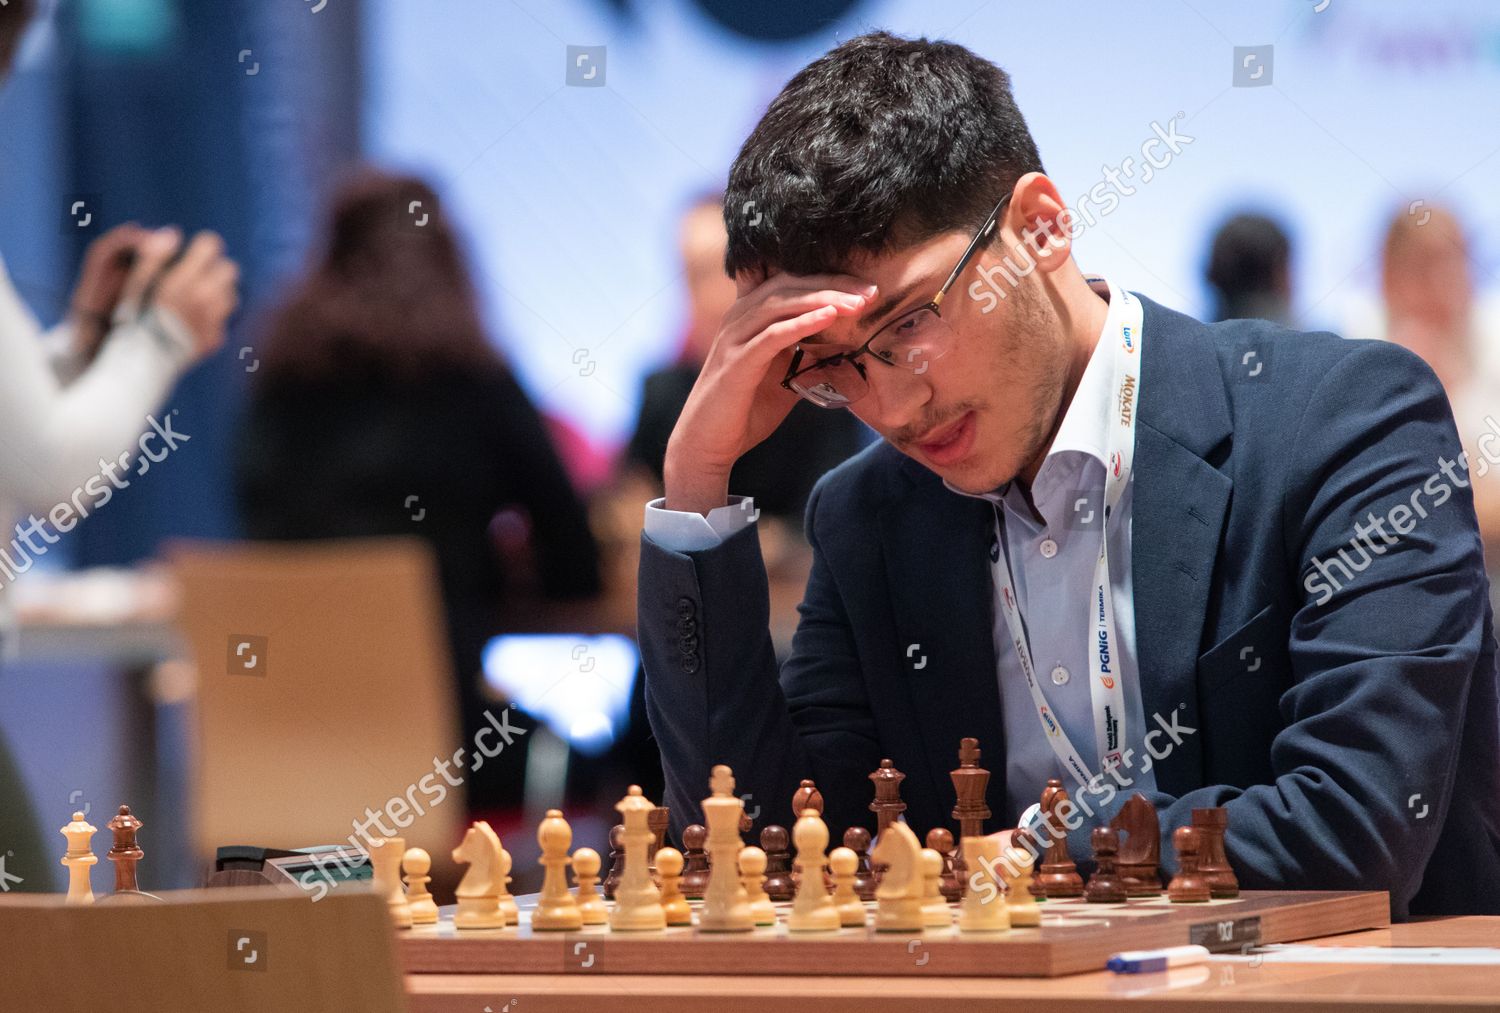 Alireza Firouzja is Knocked Out of FIDE World Cup 2021 